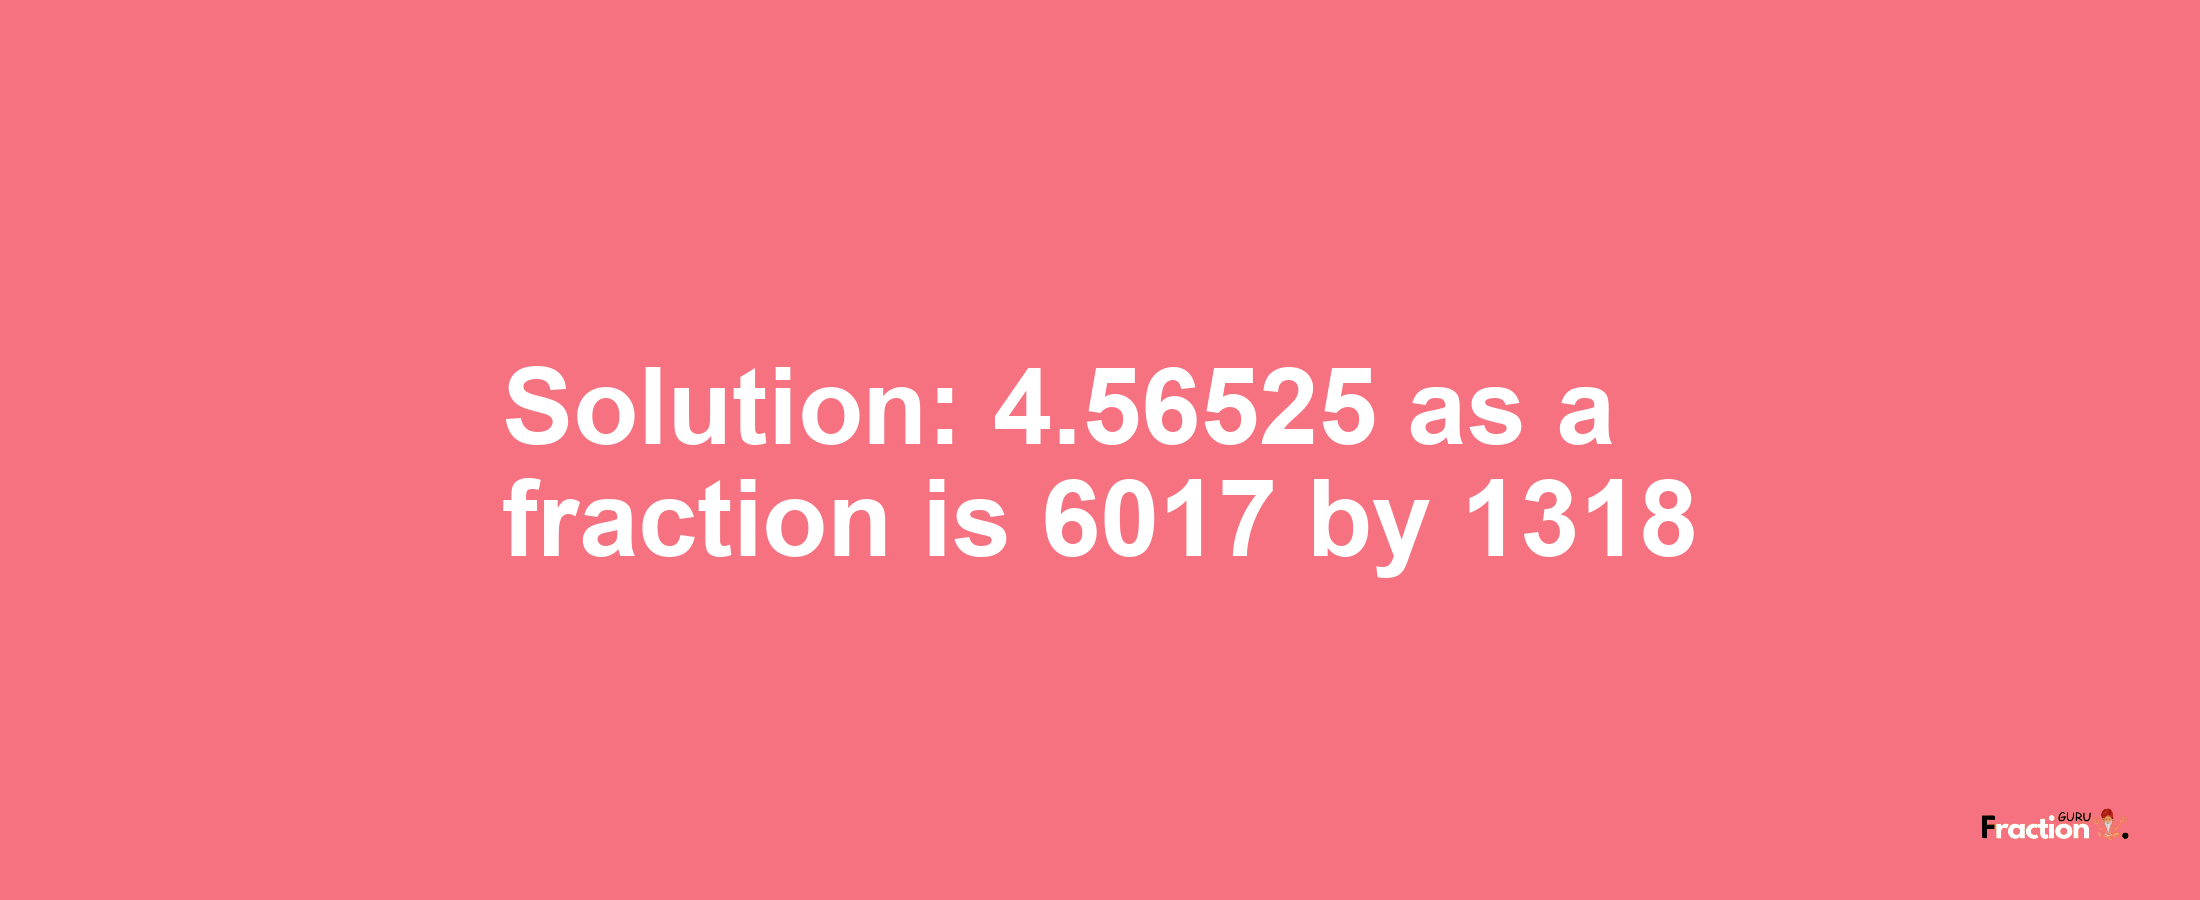 Solution:4.56525 as a fraction is 6017/1318